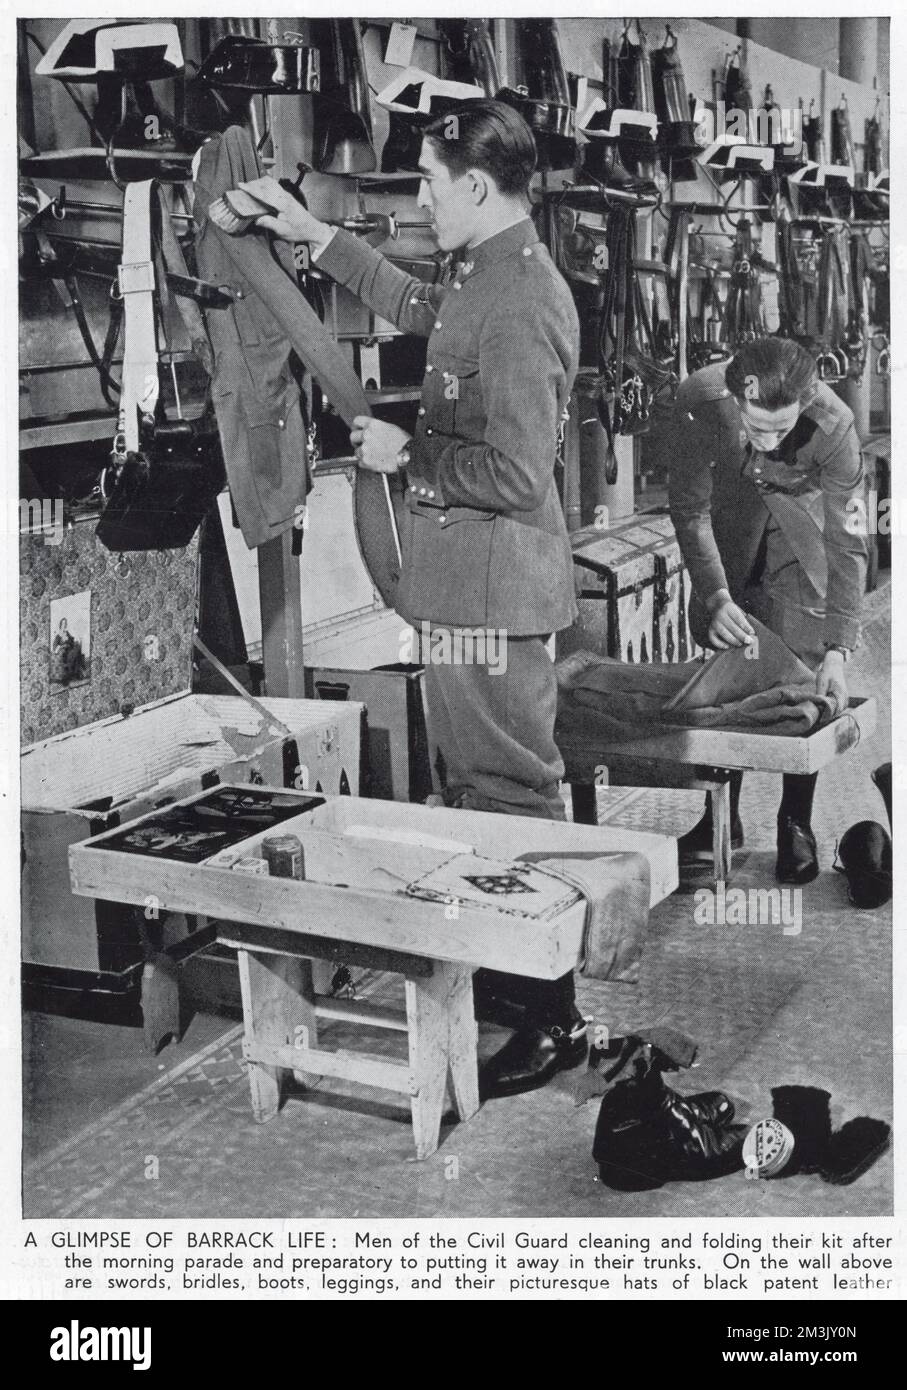 Photograph showing two Civil Guardsmen cleaning their kit in their barracks, Spain, 1936.   The Civil Guard were a cross between a military unit and a police force, who worked to maintain peace and order in Spain in both times of war and peace. The Civil Guard took an active role in the Spanish Civil War, with guardsmen serving both the Republicans and the Nationalists. Stock Photo